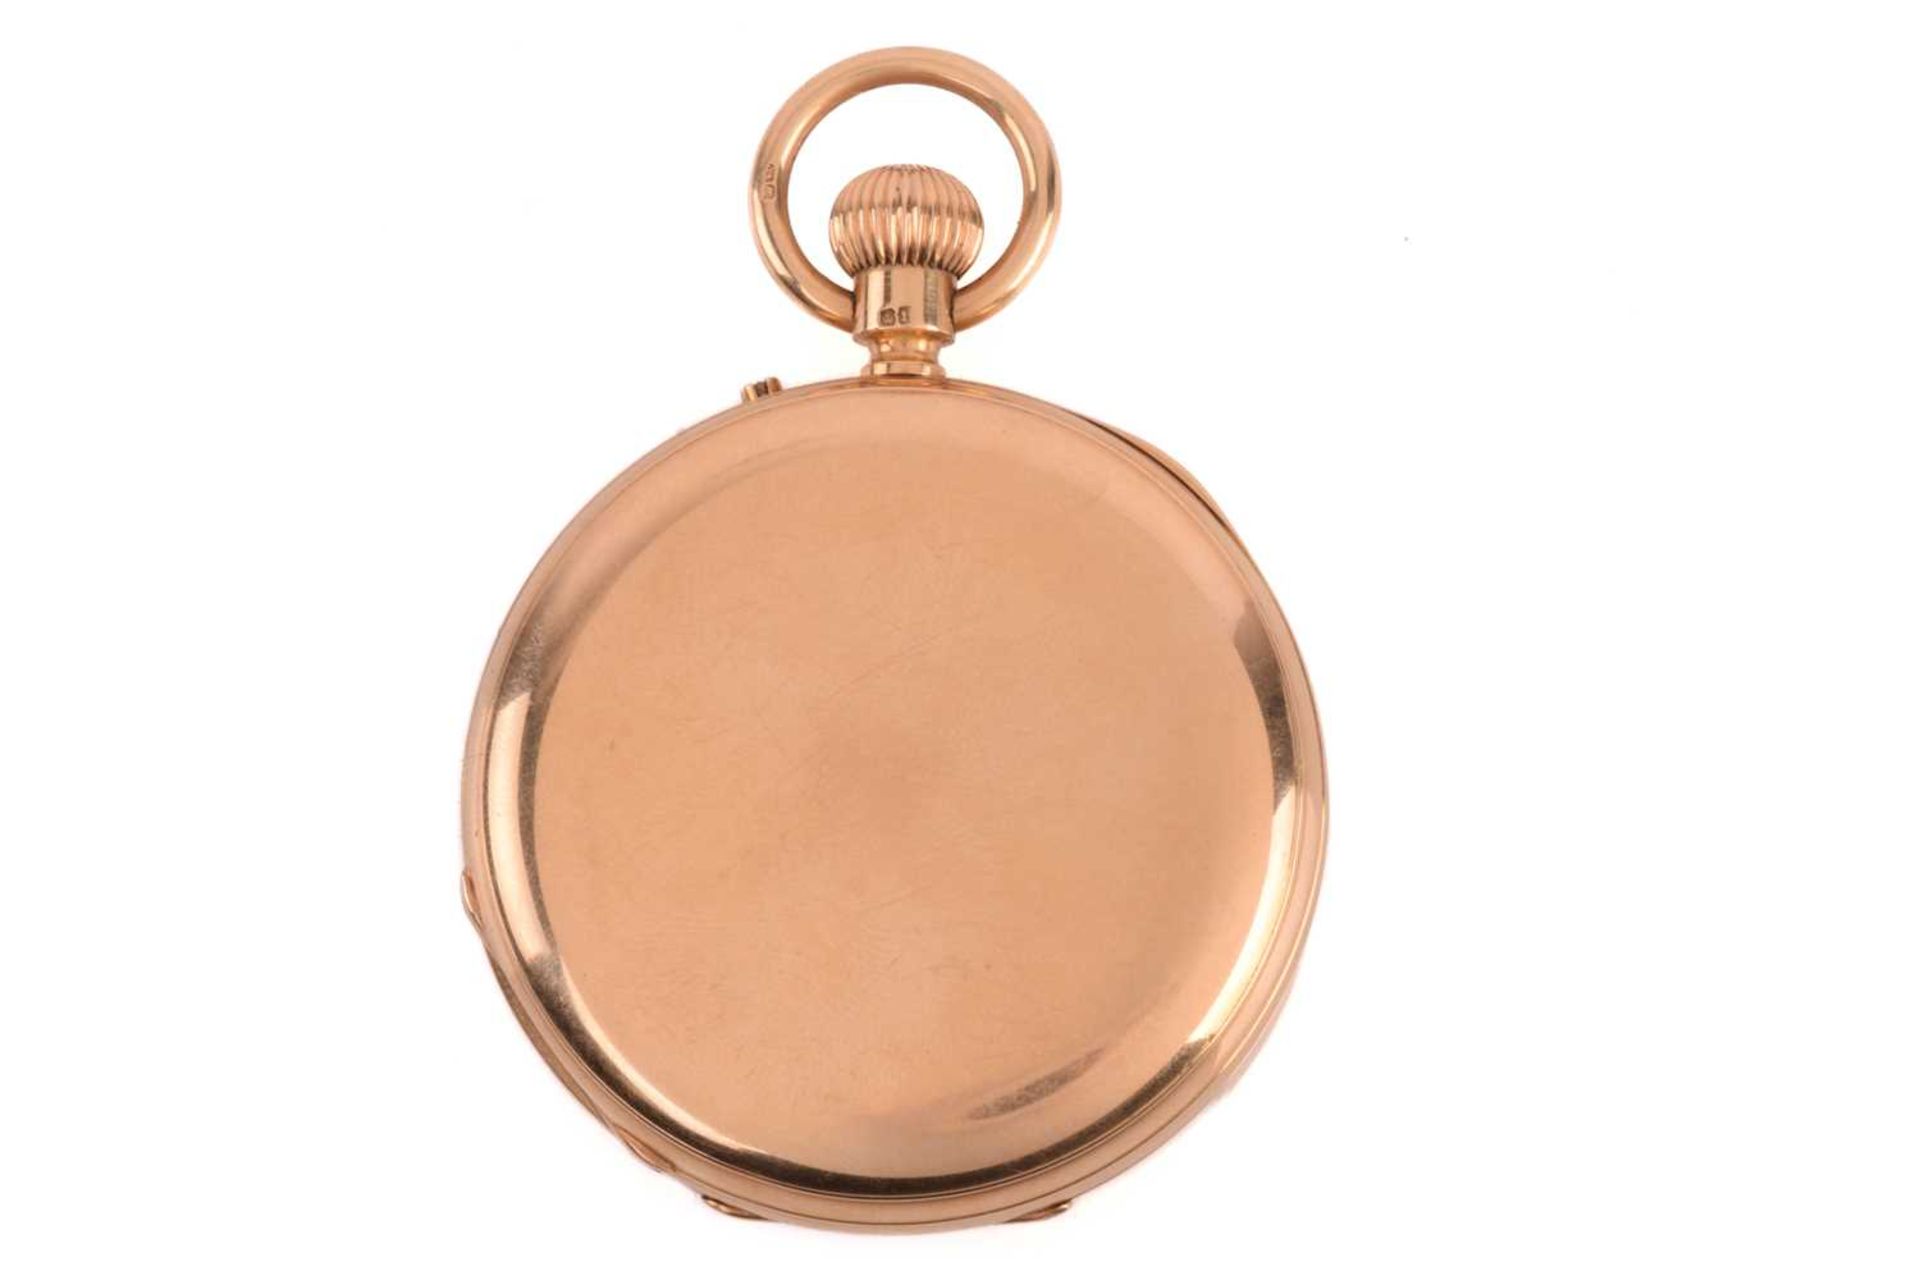 An 18ct gold Barwise London full hunter pocket watch, featuring a keyless wound signed movement in - Image 6 of 6